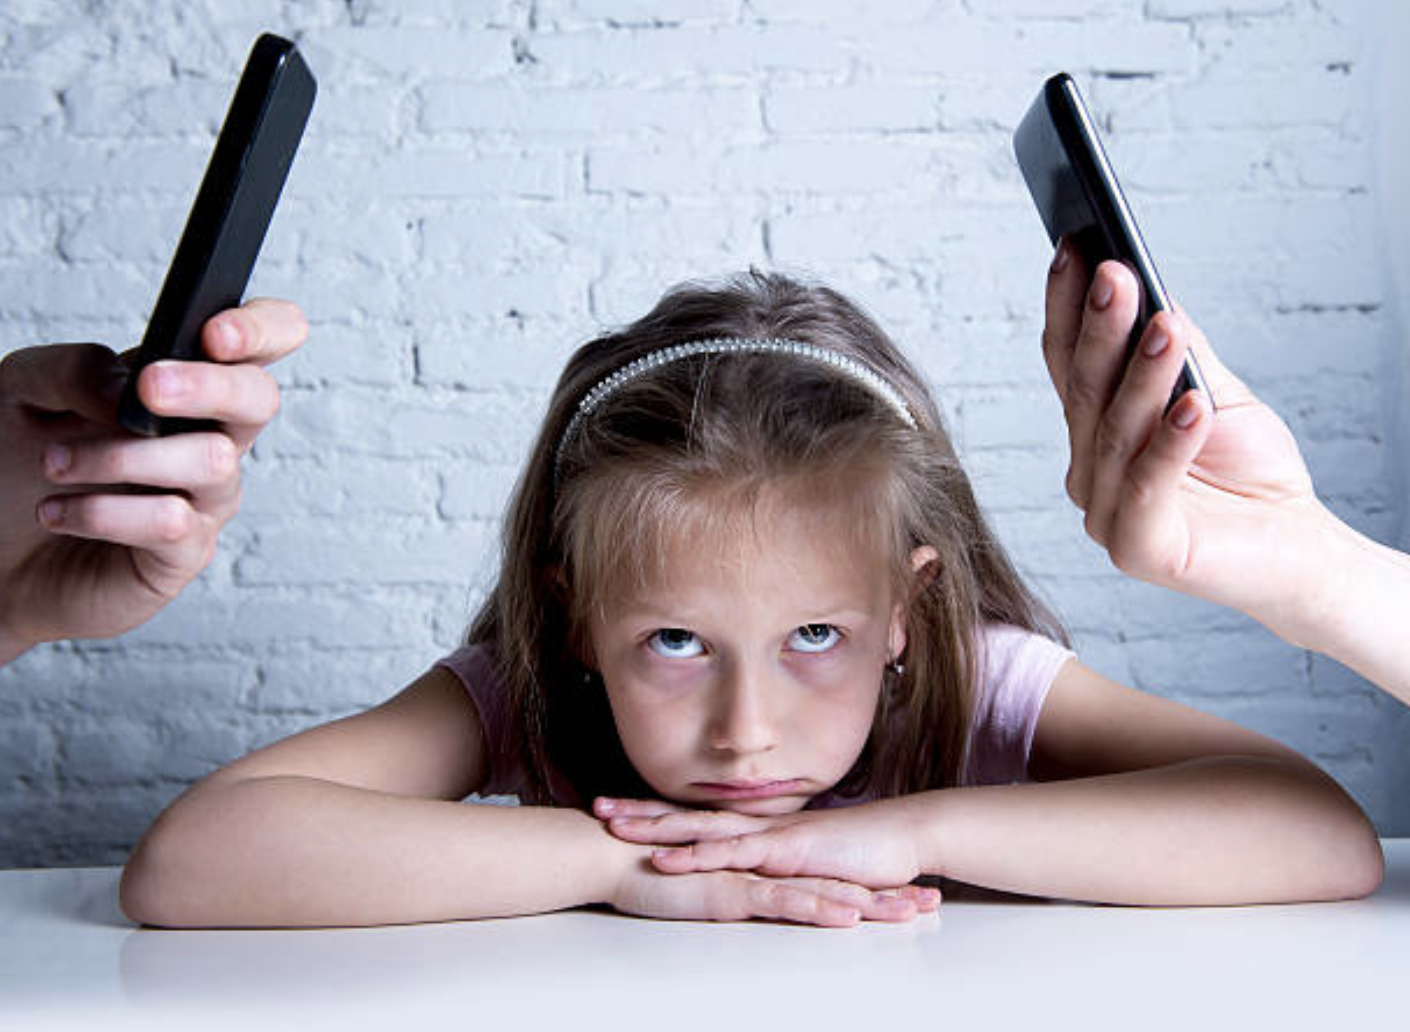 Is Your Cellphone Addiction Harming Your Child?